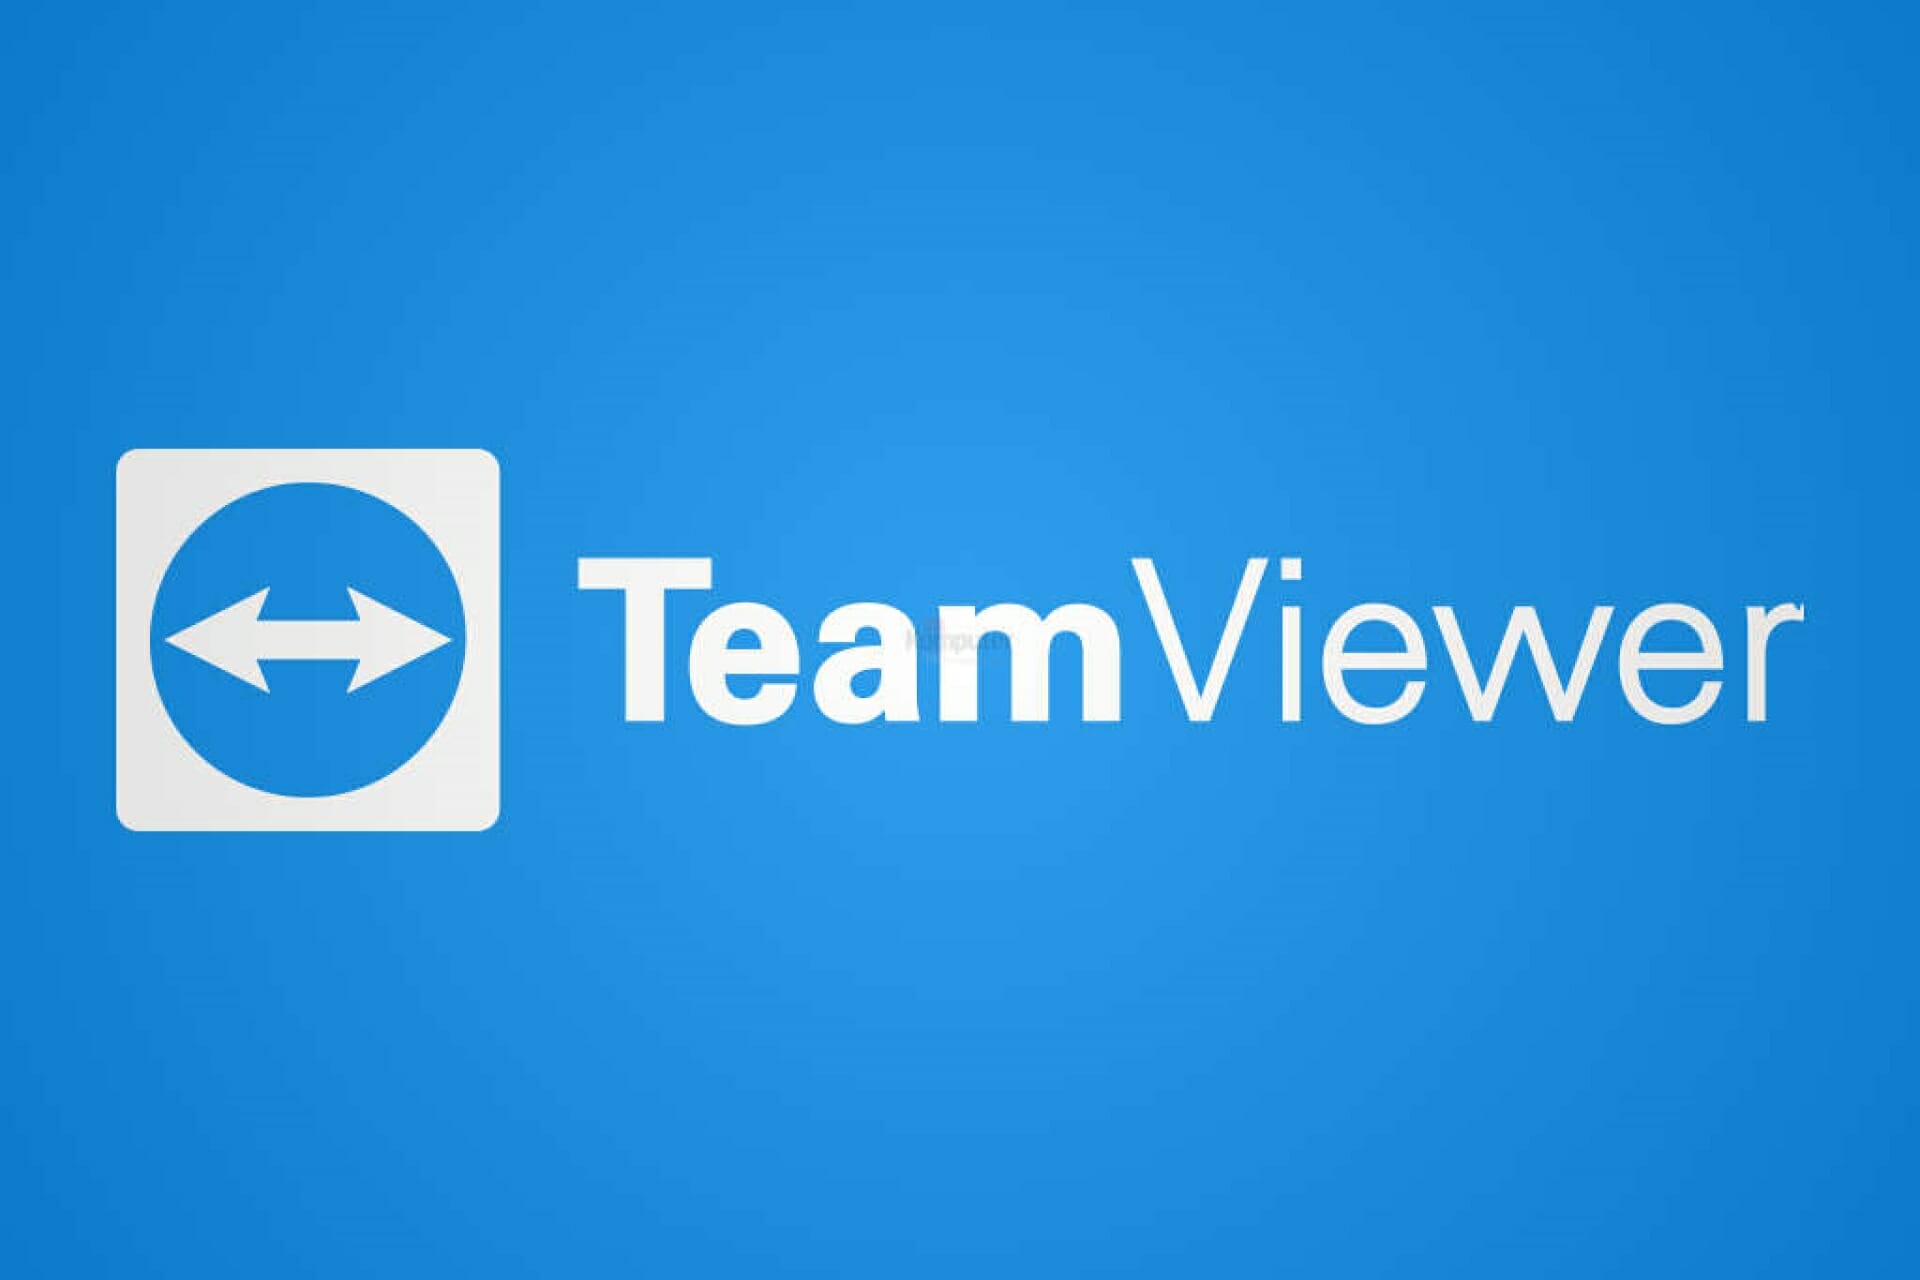 teamviewer your license limits the maximum session duration to a partner